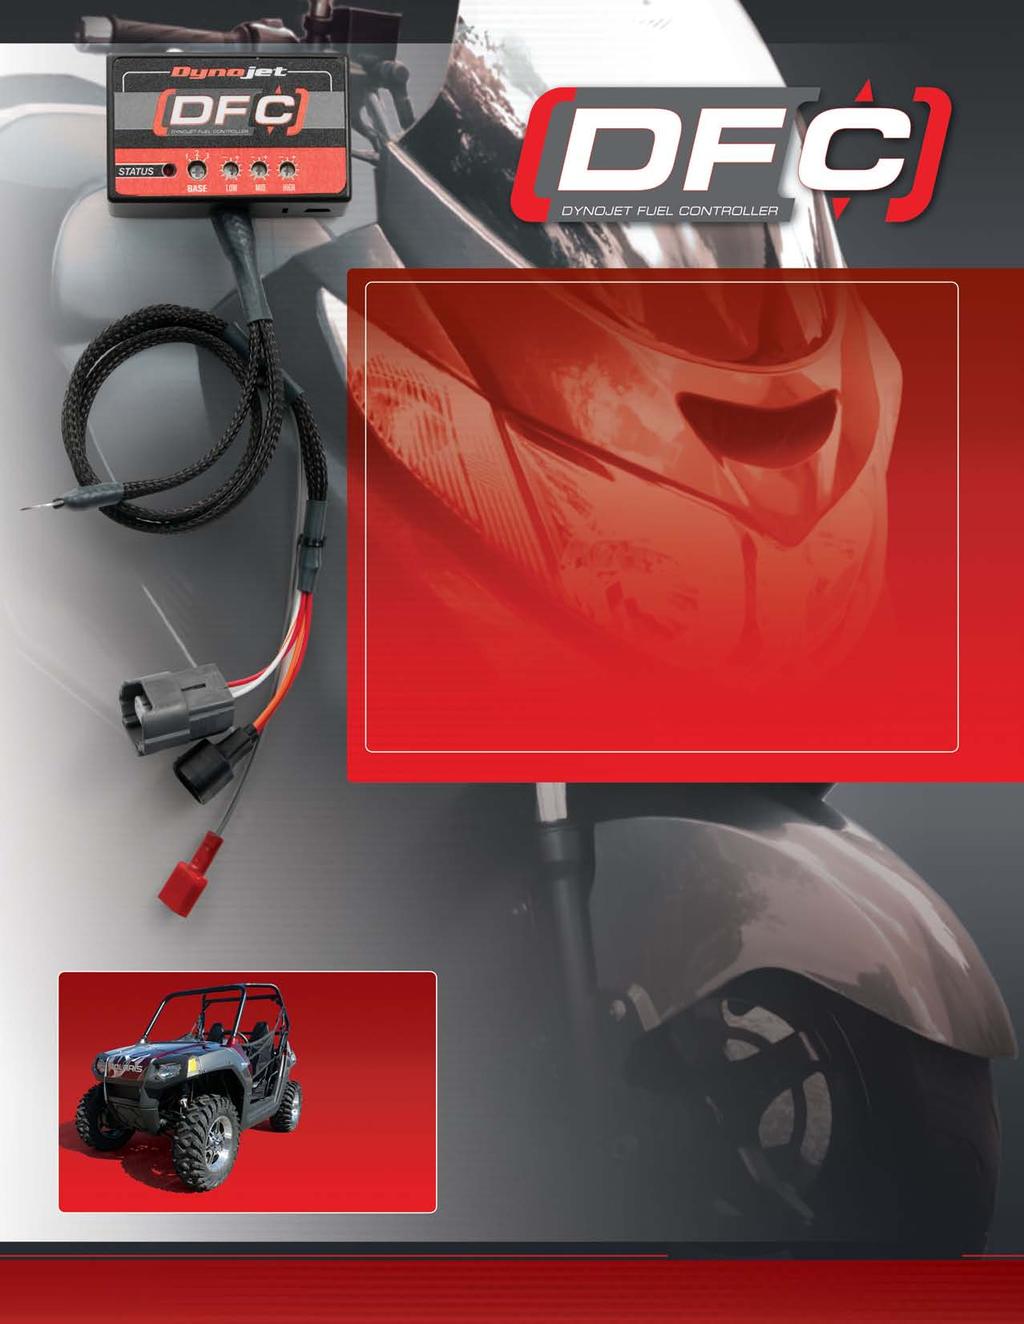 DYNO TESTED BASE MAPS FOR COMMON CONFIGURATIONS EASY INSTALLATION (OEM STYLE CONNECTORS) NO COMPUTER REQUIRED FOR ADJUSTMENTS The new Dynojet Fuel Controller (DFC) is a plug in module that offers 3